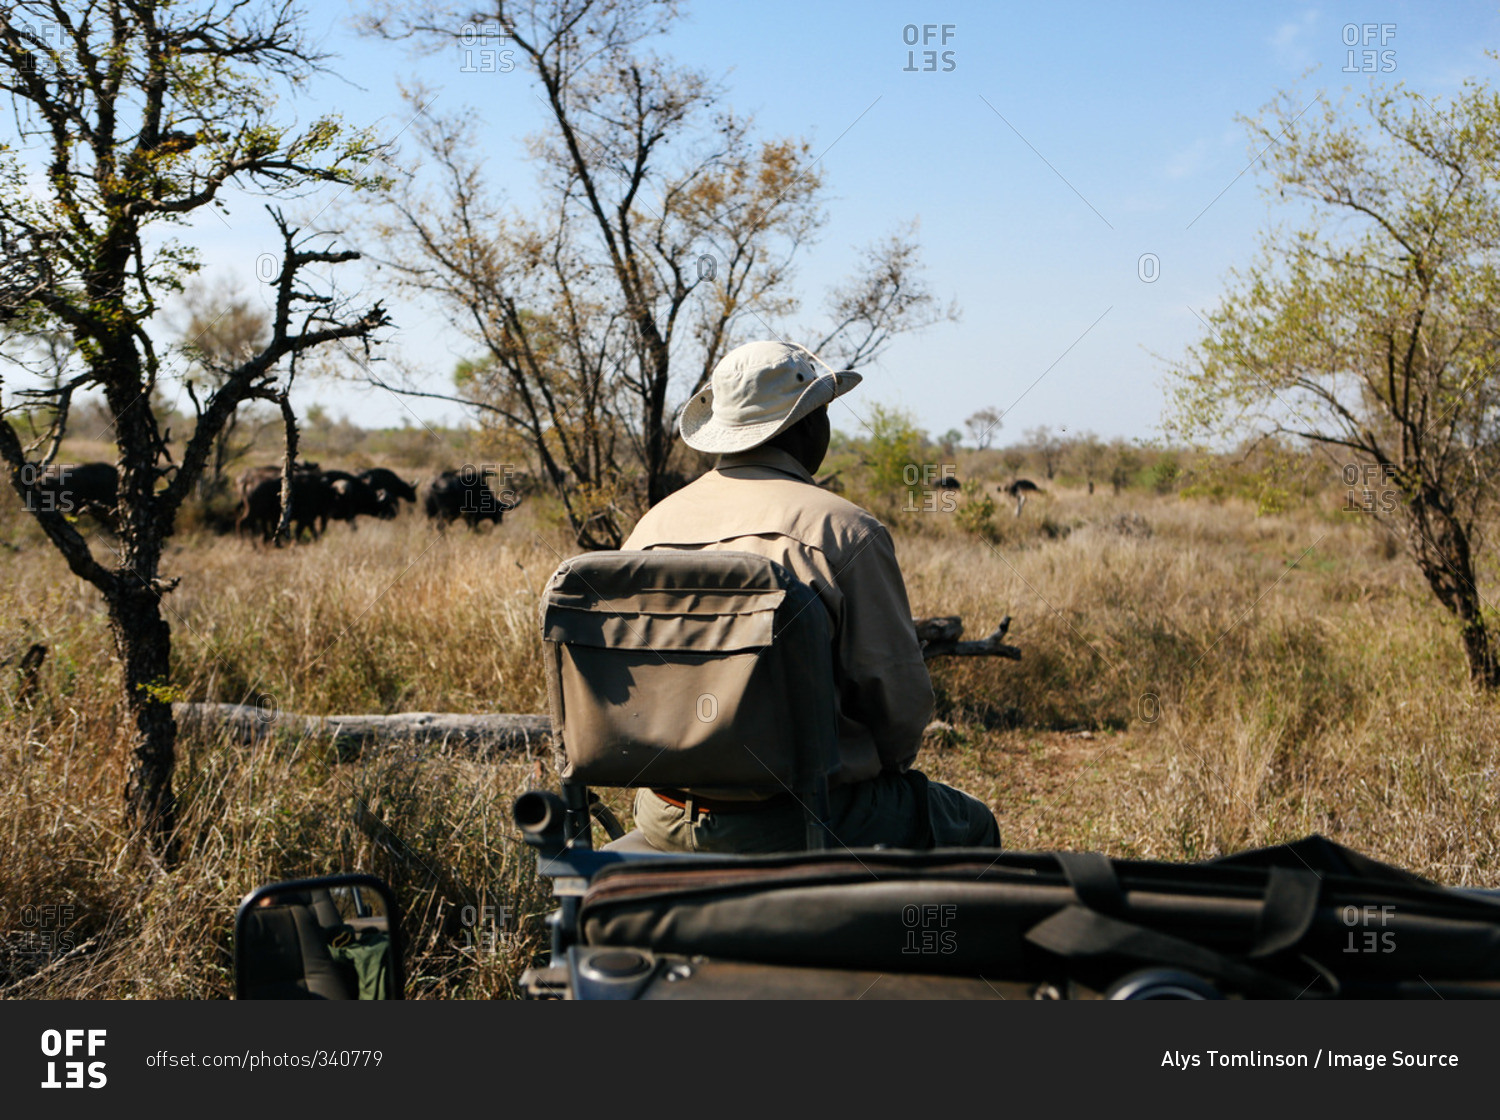 Tracker in bush on safari, buffalo in background, Kruger National Park, South Africa